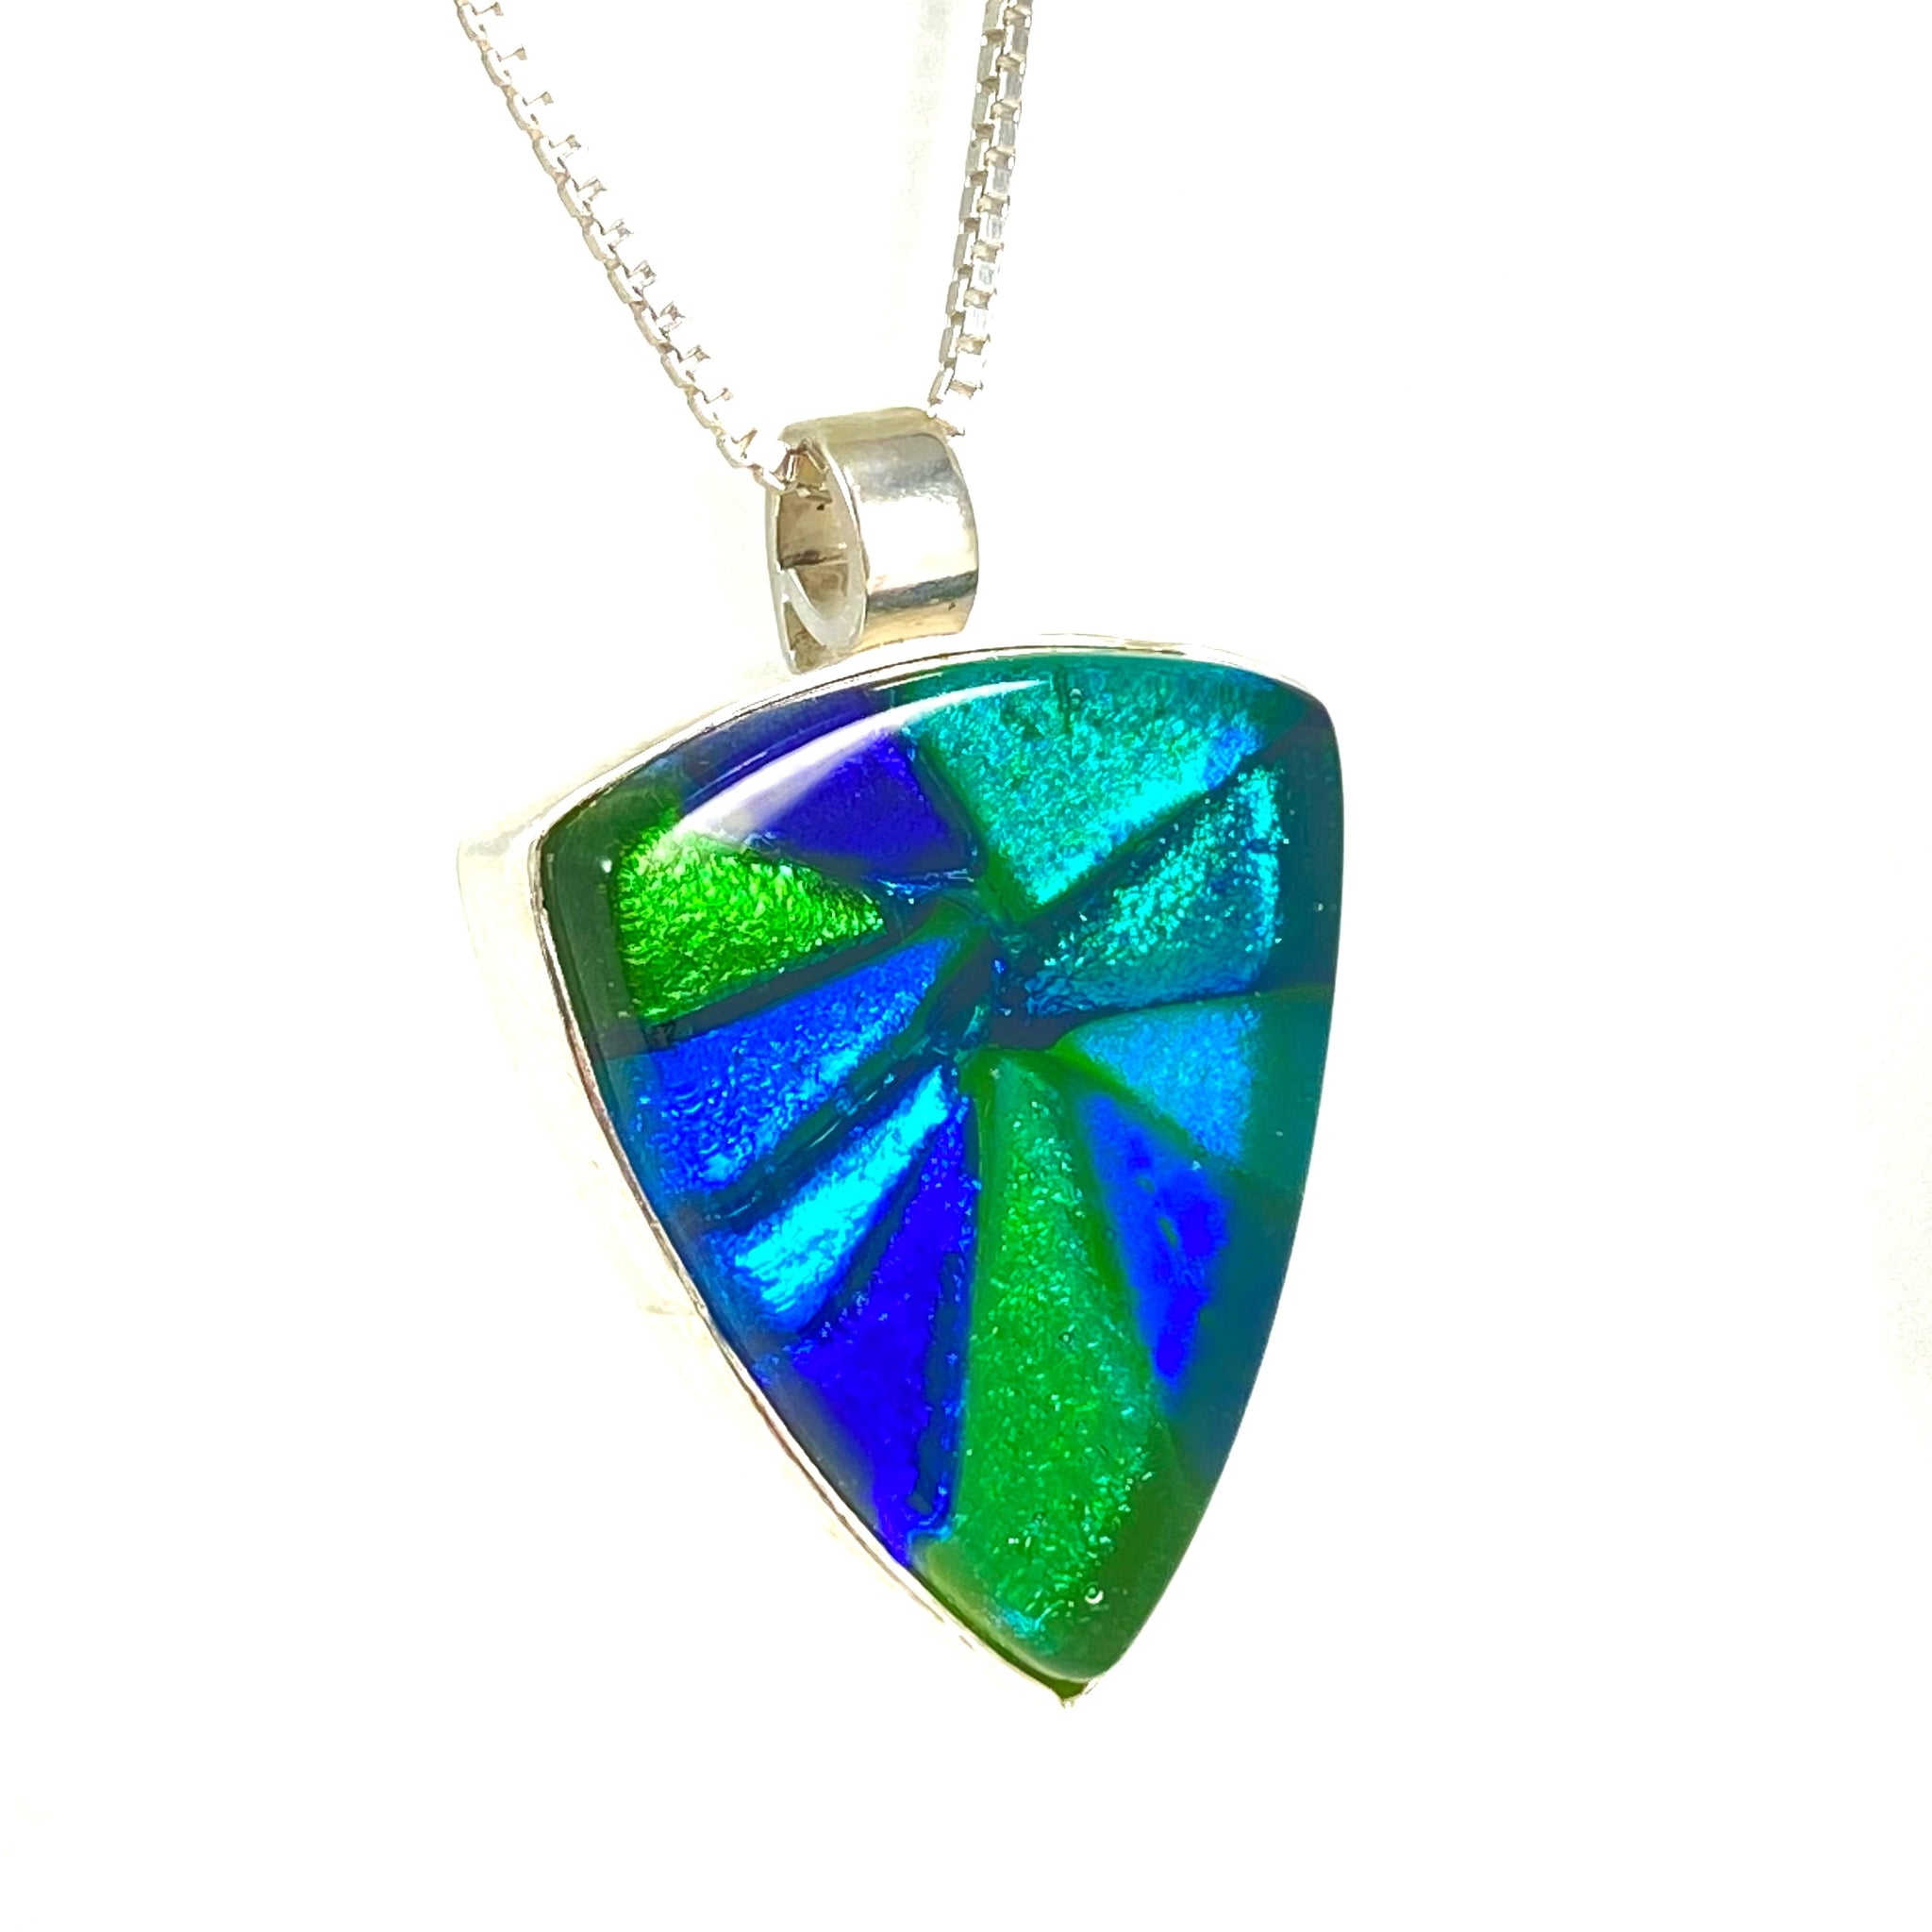 blue and green mixture necklace, fused glass, glass jewelry, glass and silver jewelry, handmade, handcrafted, American Craft, hand fabricated jewelry, hand fabricated jewellery, Athen, Georgia, colorful jewelry, sparkle, bullseye glass, dichroic glass, art jewelry